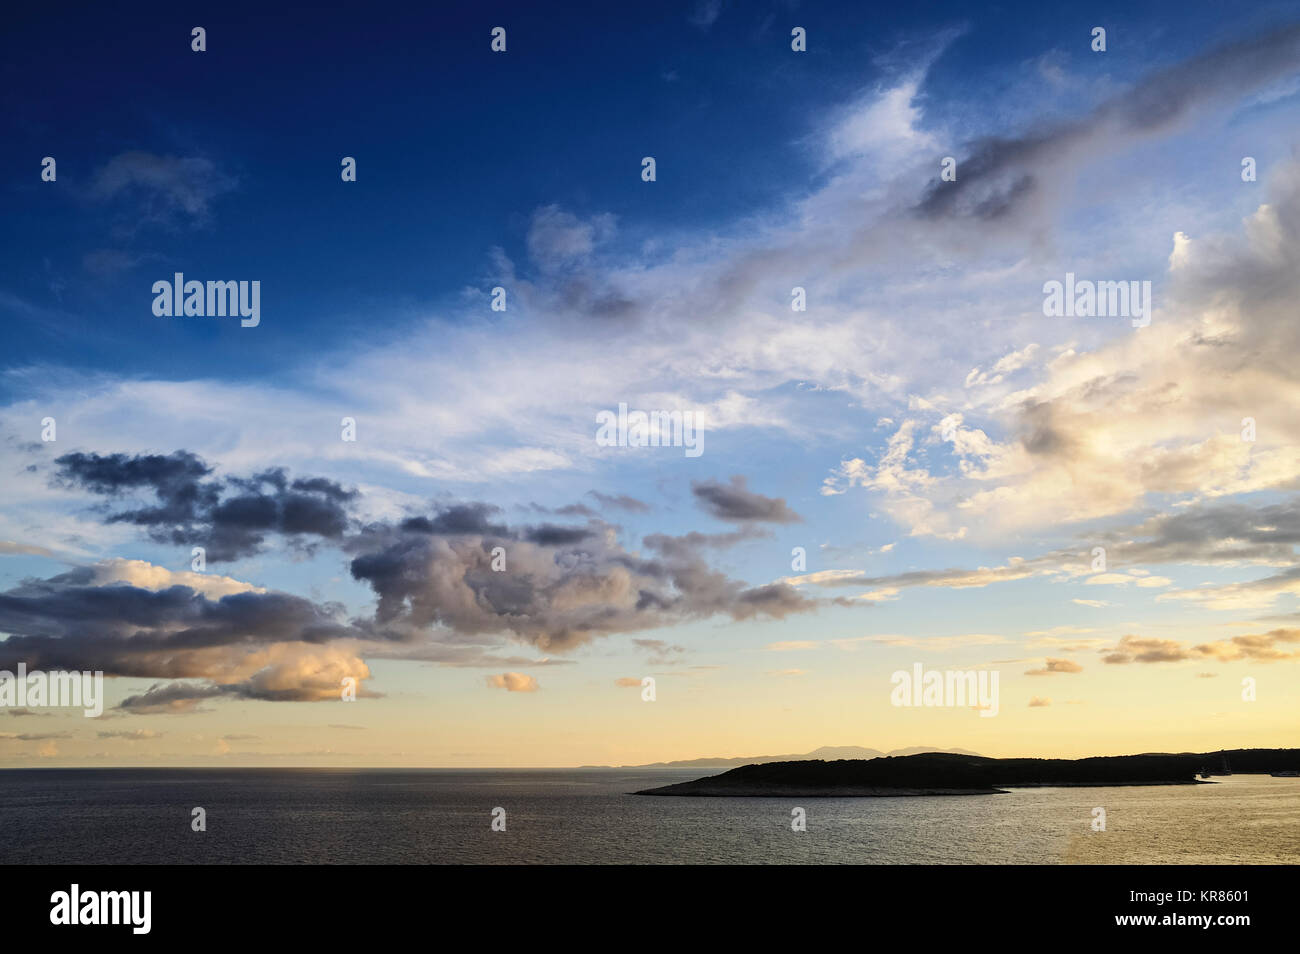 evening sky with great clouds over the sea and an island Stock Photo